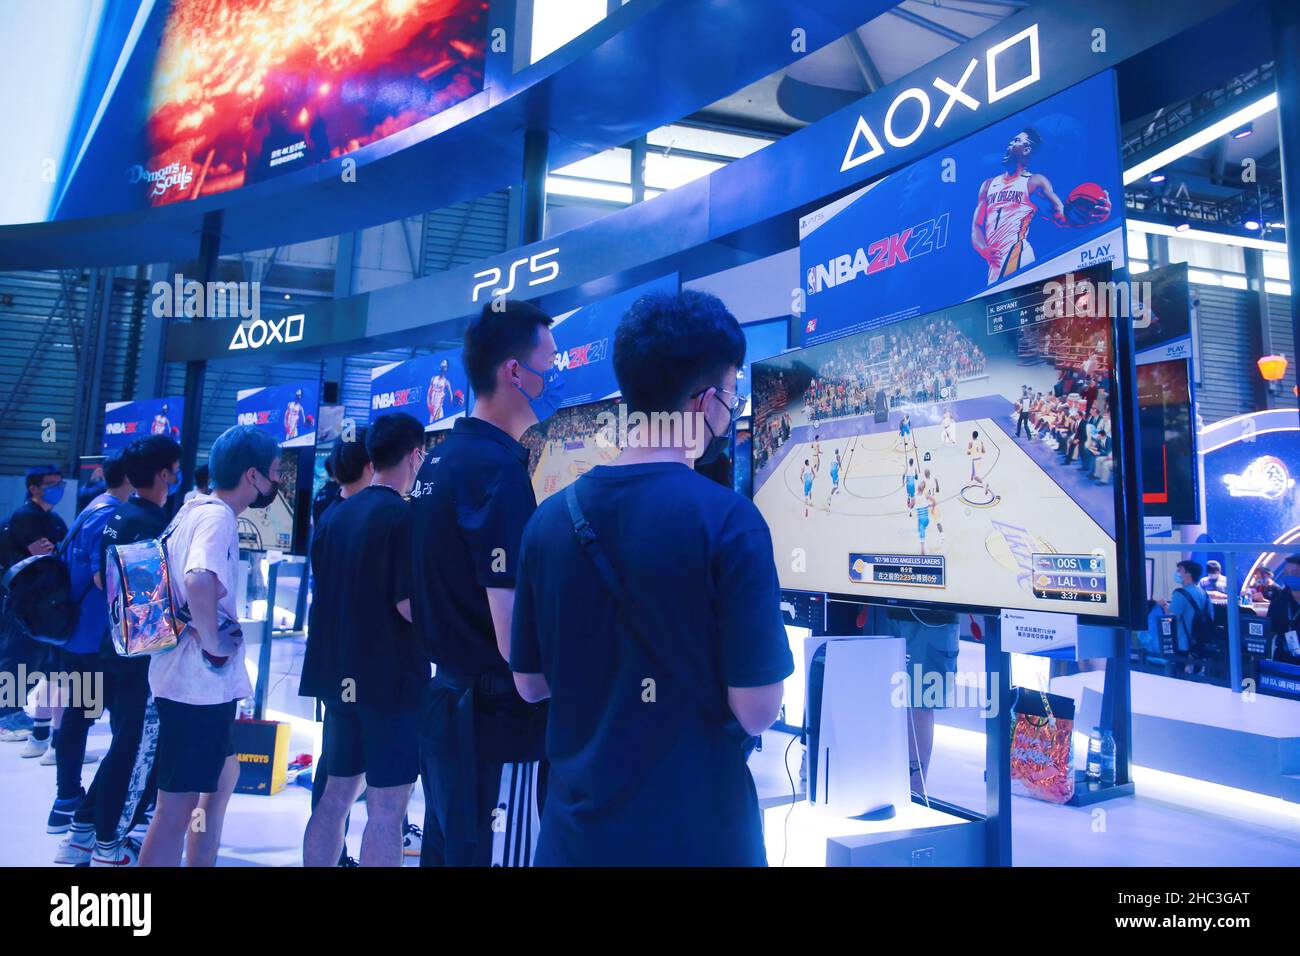 SHANGHAI, CHINA - AUGUST 1, 2021 - The newest NBA basketball game is popular at the SONY PS5 booth at Chinajoy China Digital Interactive Entertainment Stock Photo